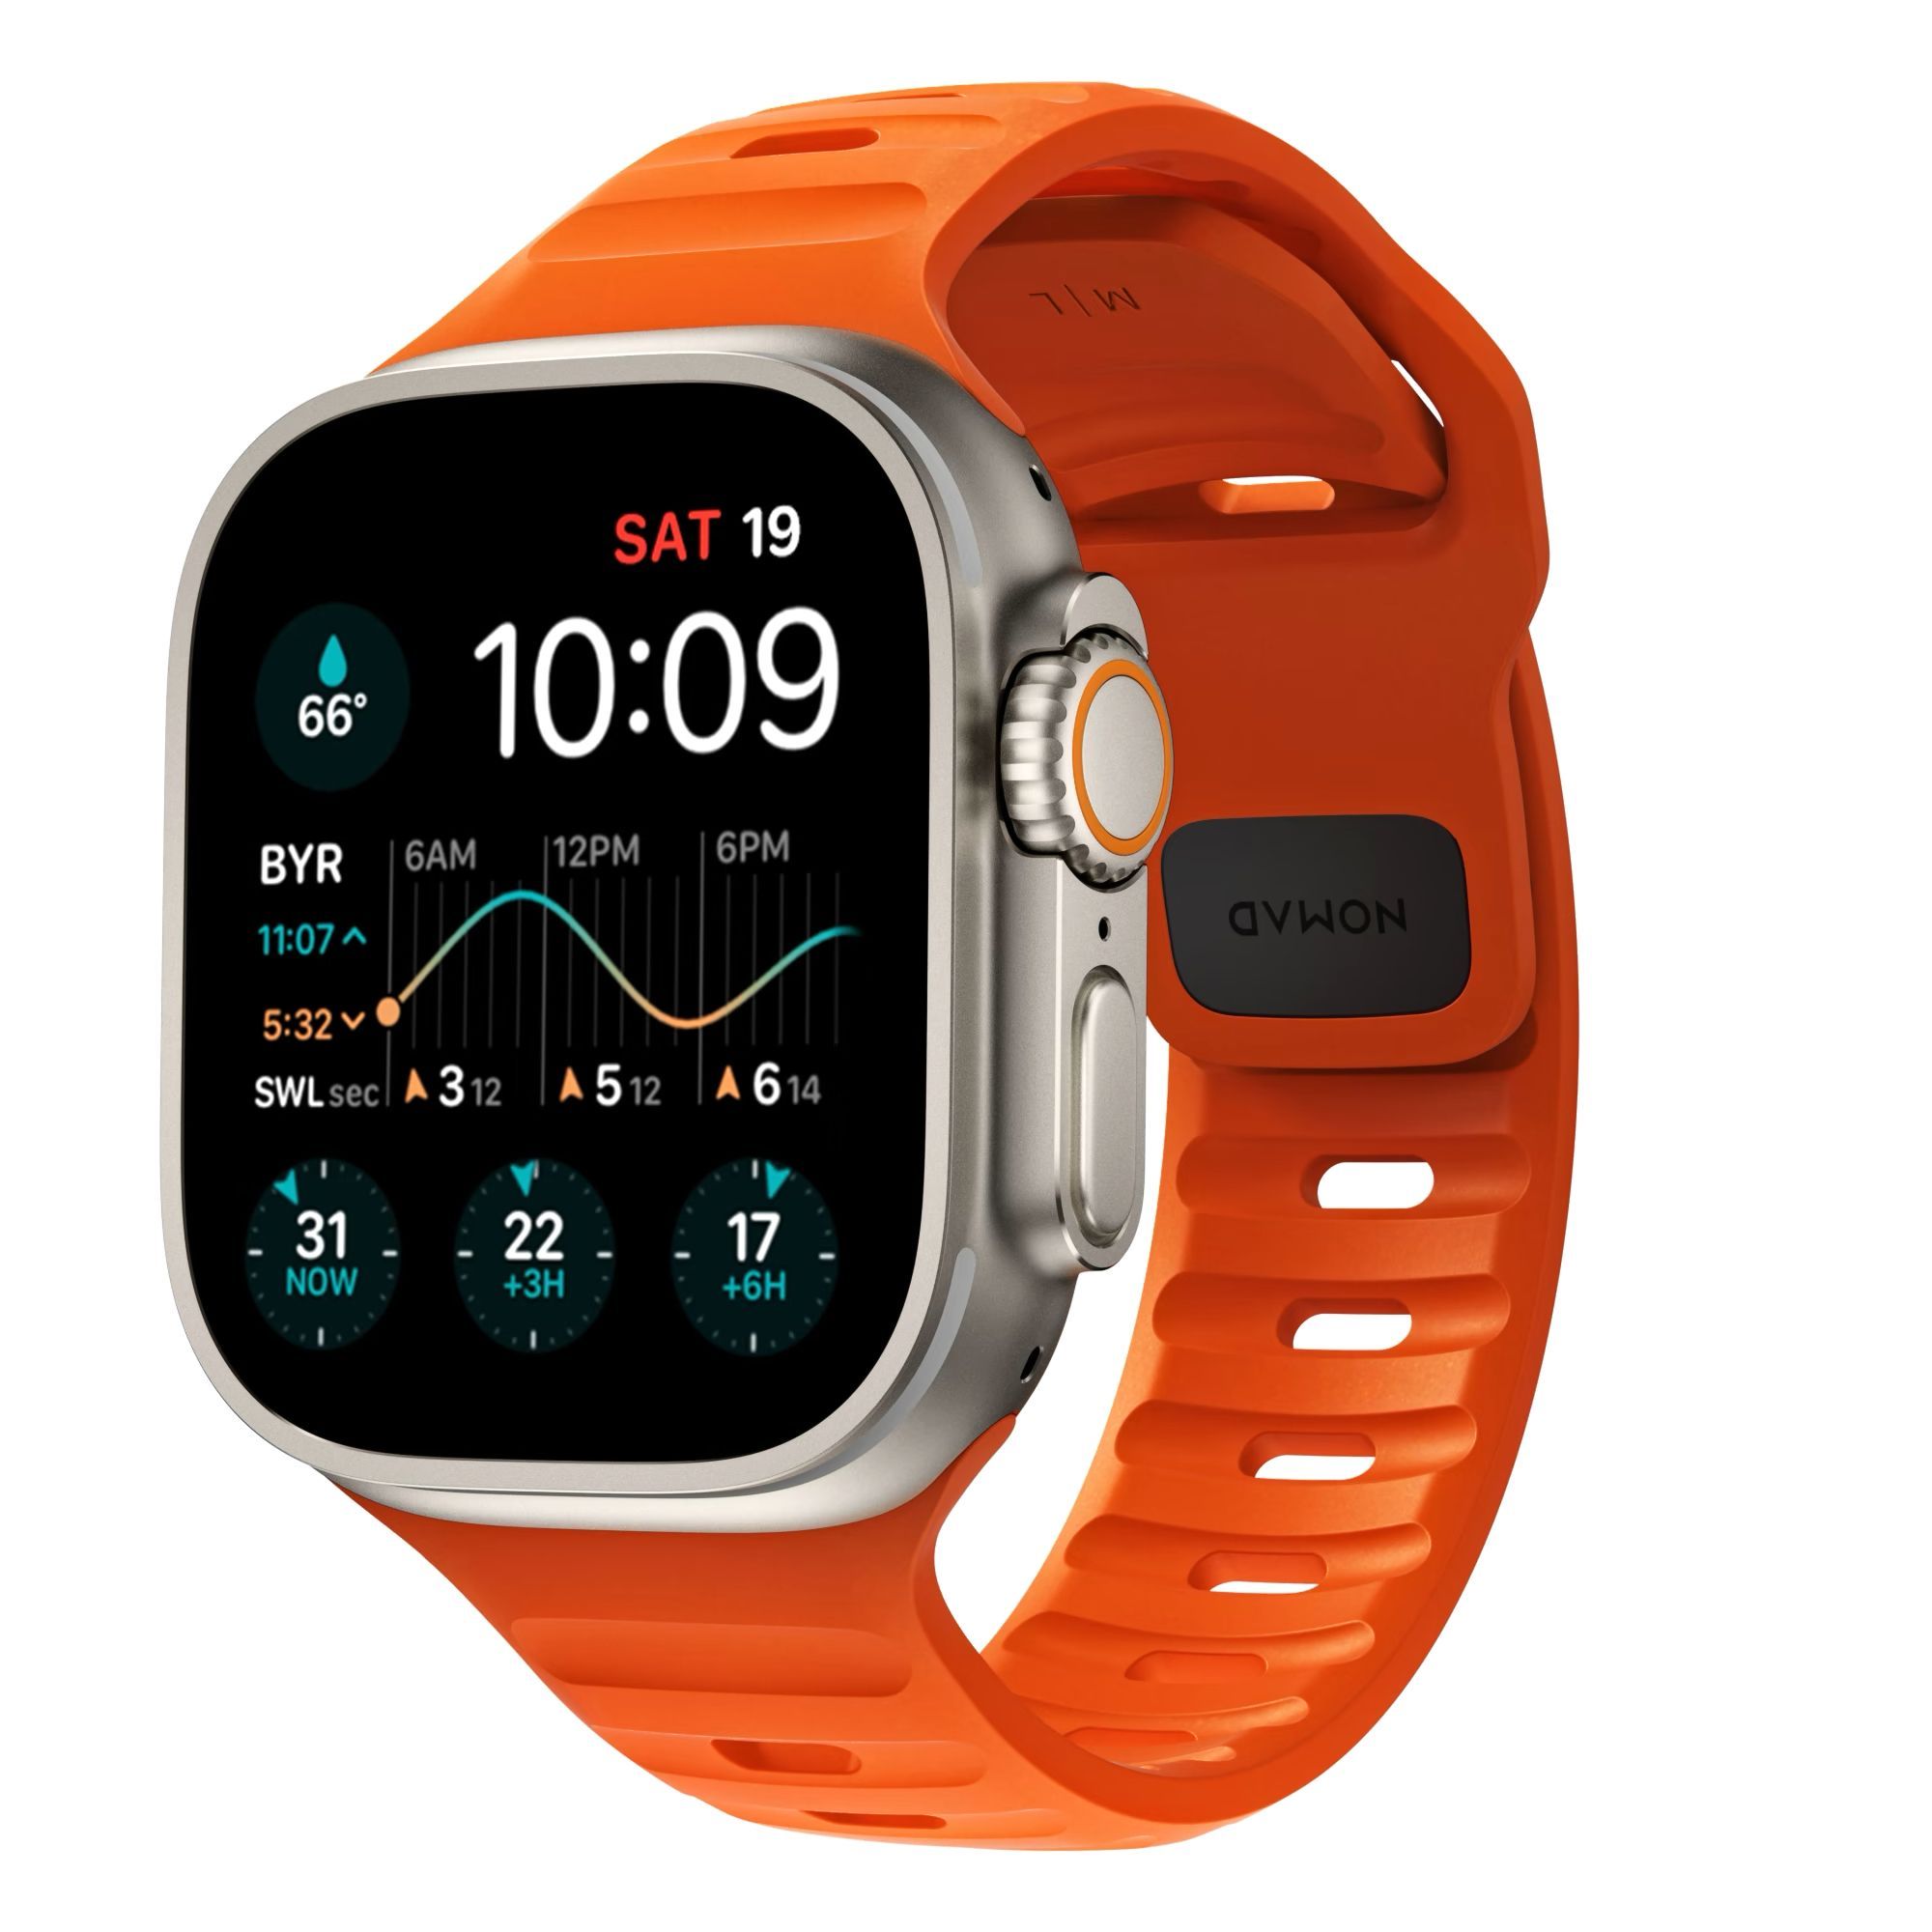 New Titanium Apple Watch band from SANDMARC now 10 off